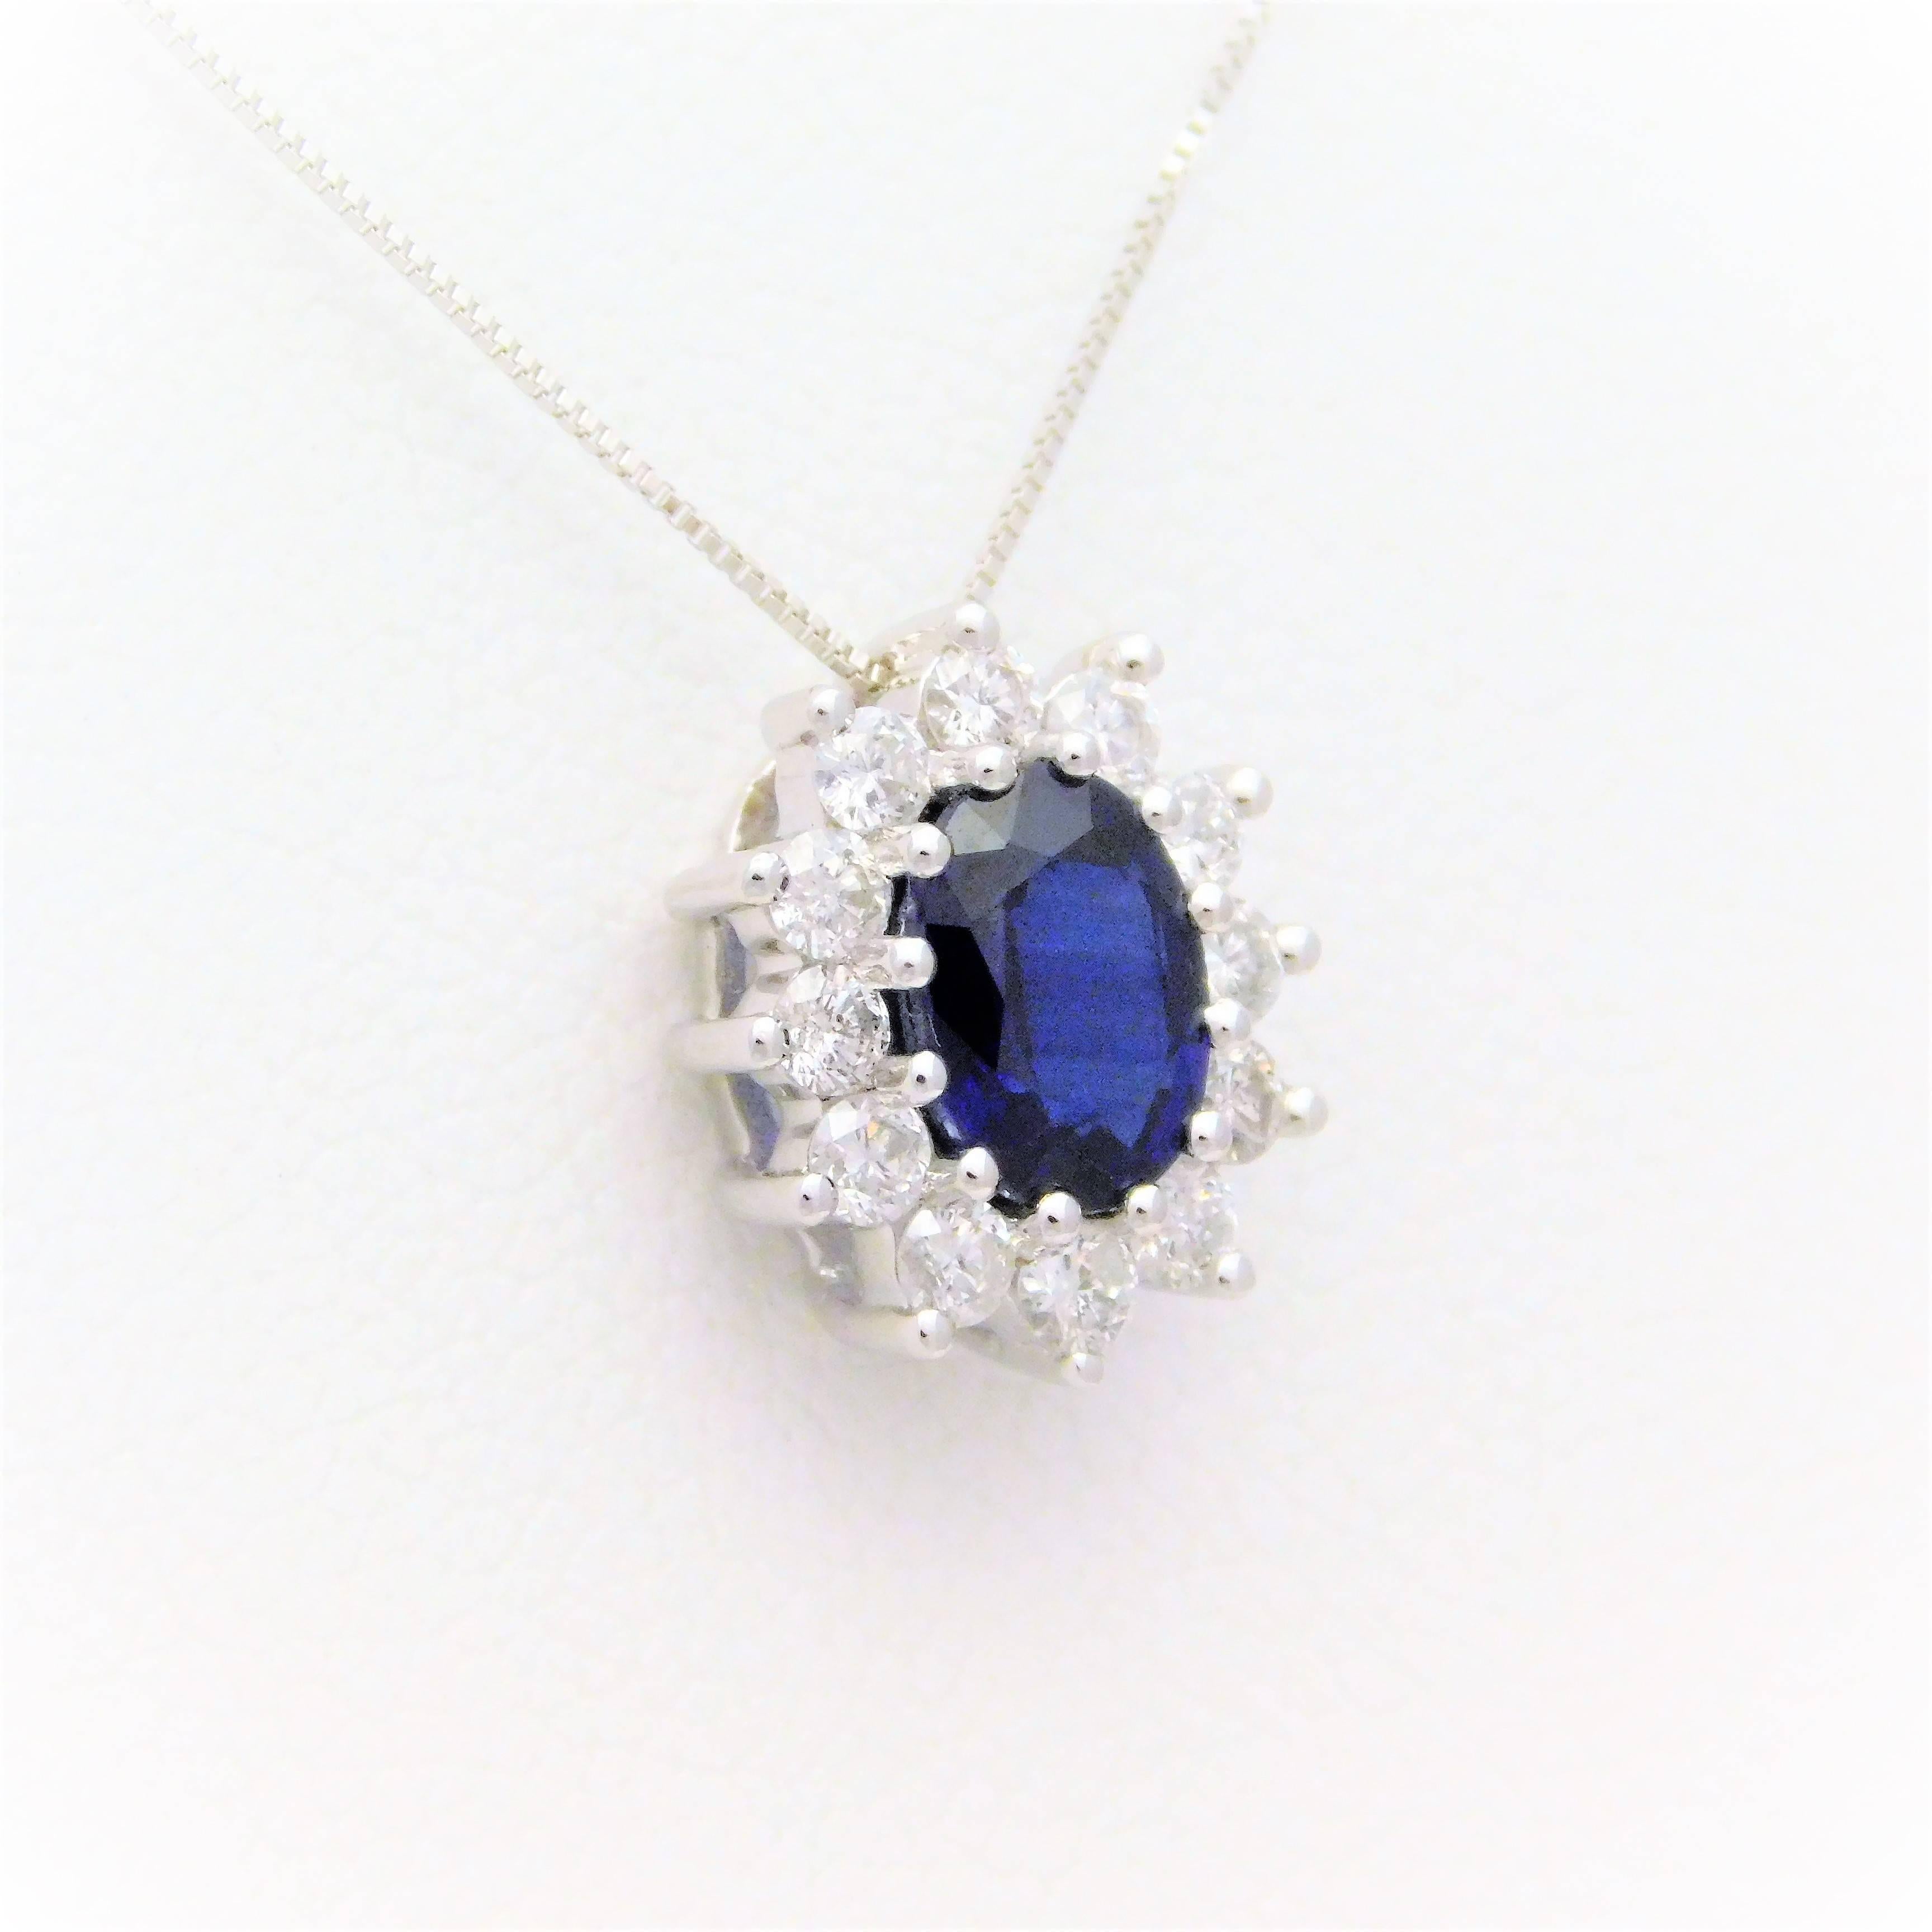 From a noble New Orleans estate, this exquisite pendant necklace has been crafted in solid 14k white gold.  It has been masterfully jeweled with a gorgeous deep blue oval faceted natural sapphire totaling 0.90ct.  Surrounding this amazing stone, in